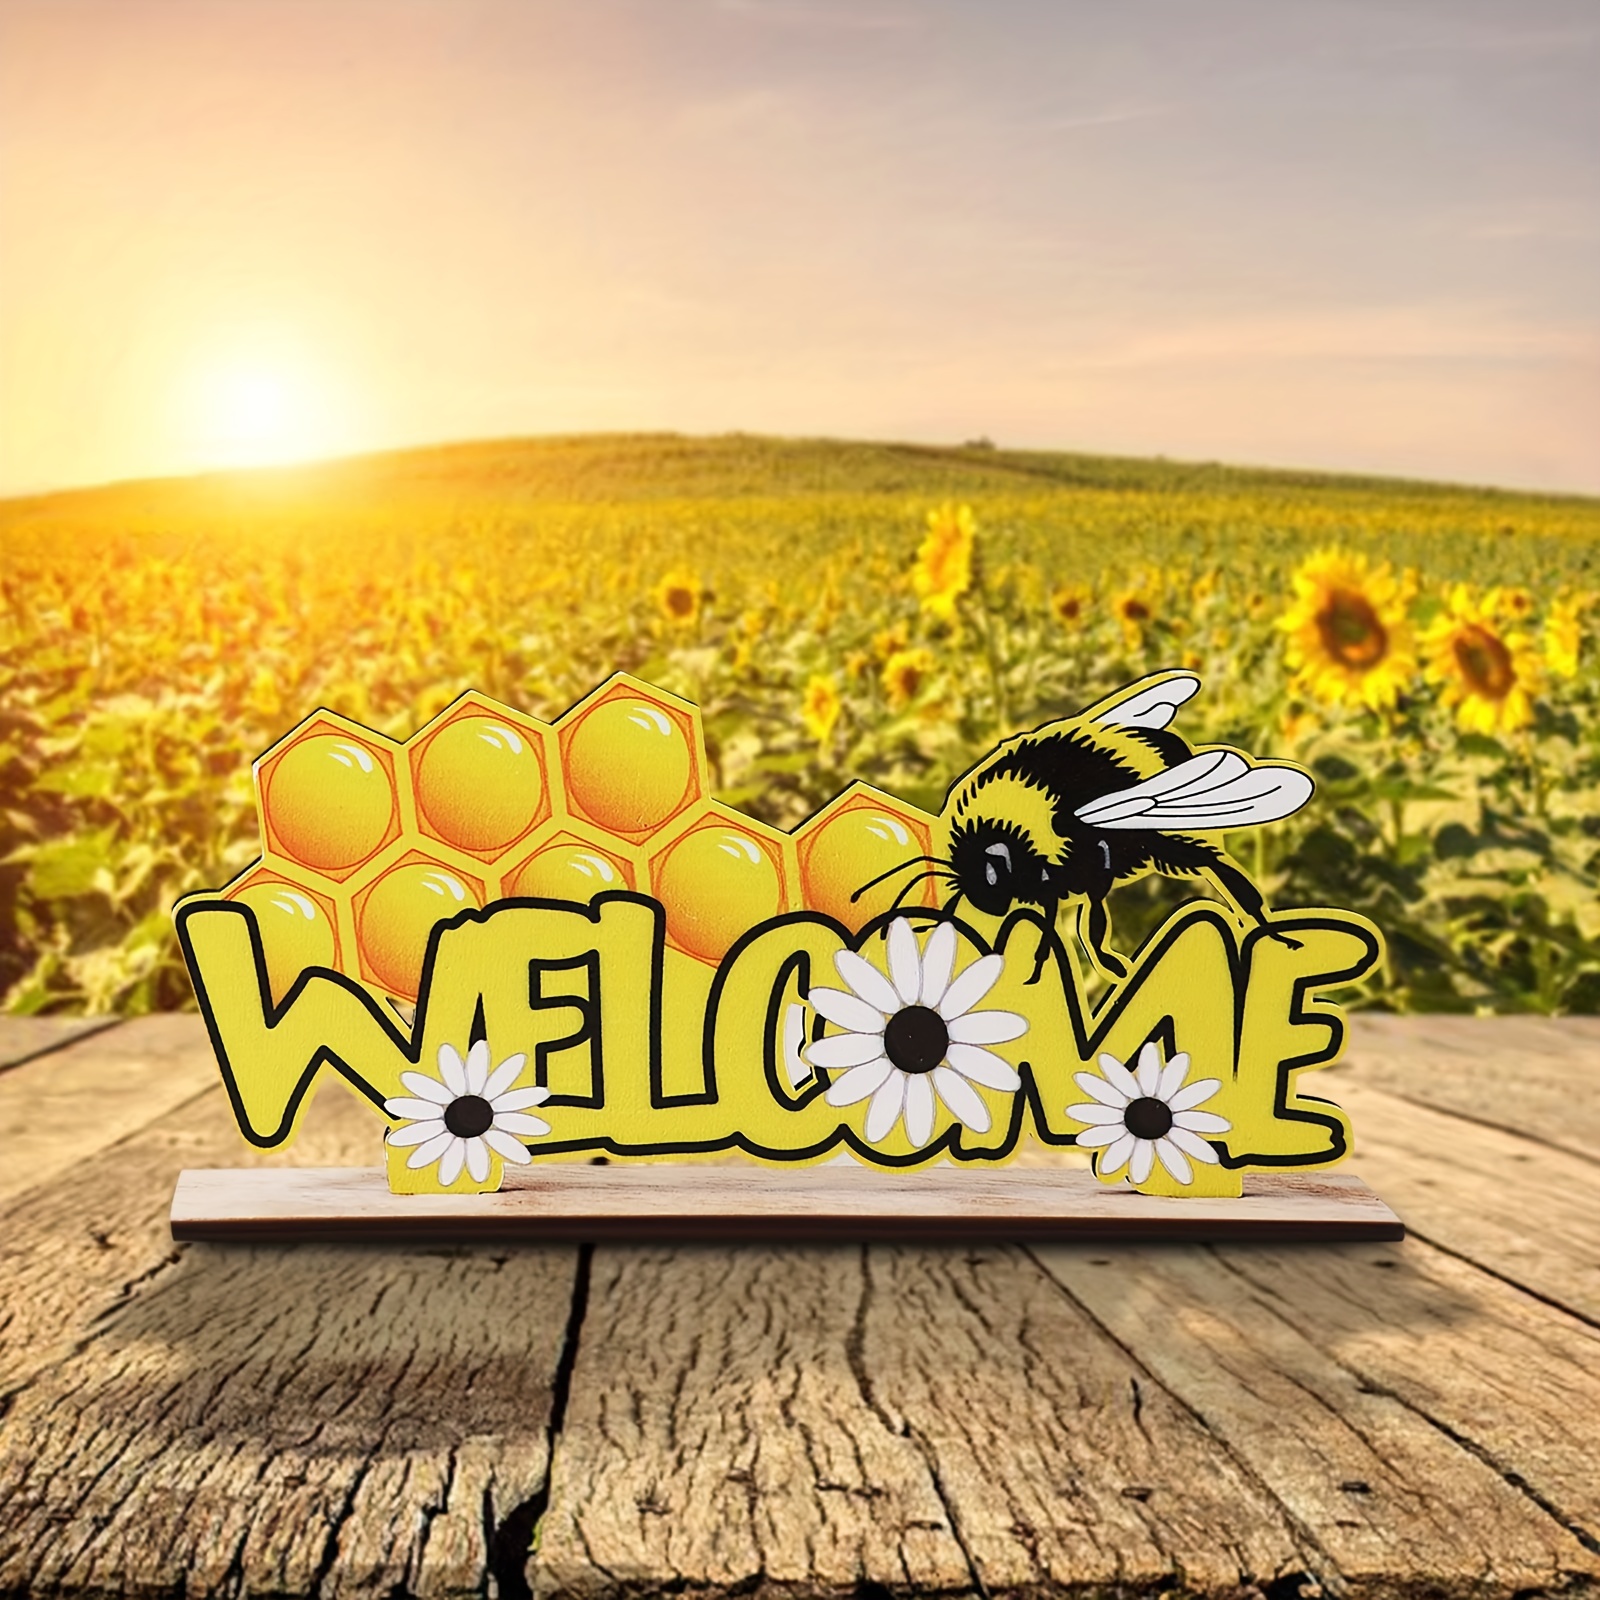 Summer Bee Themed Wooden Centerpieces - Honeycomb Decor Ornaments